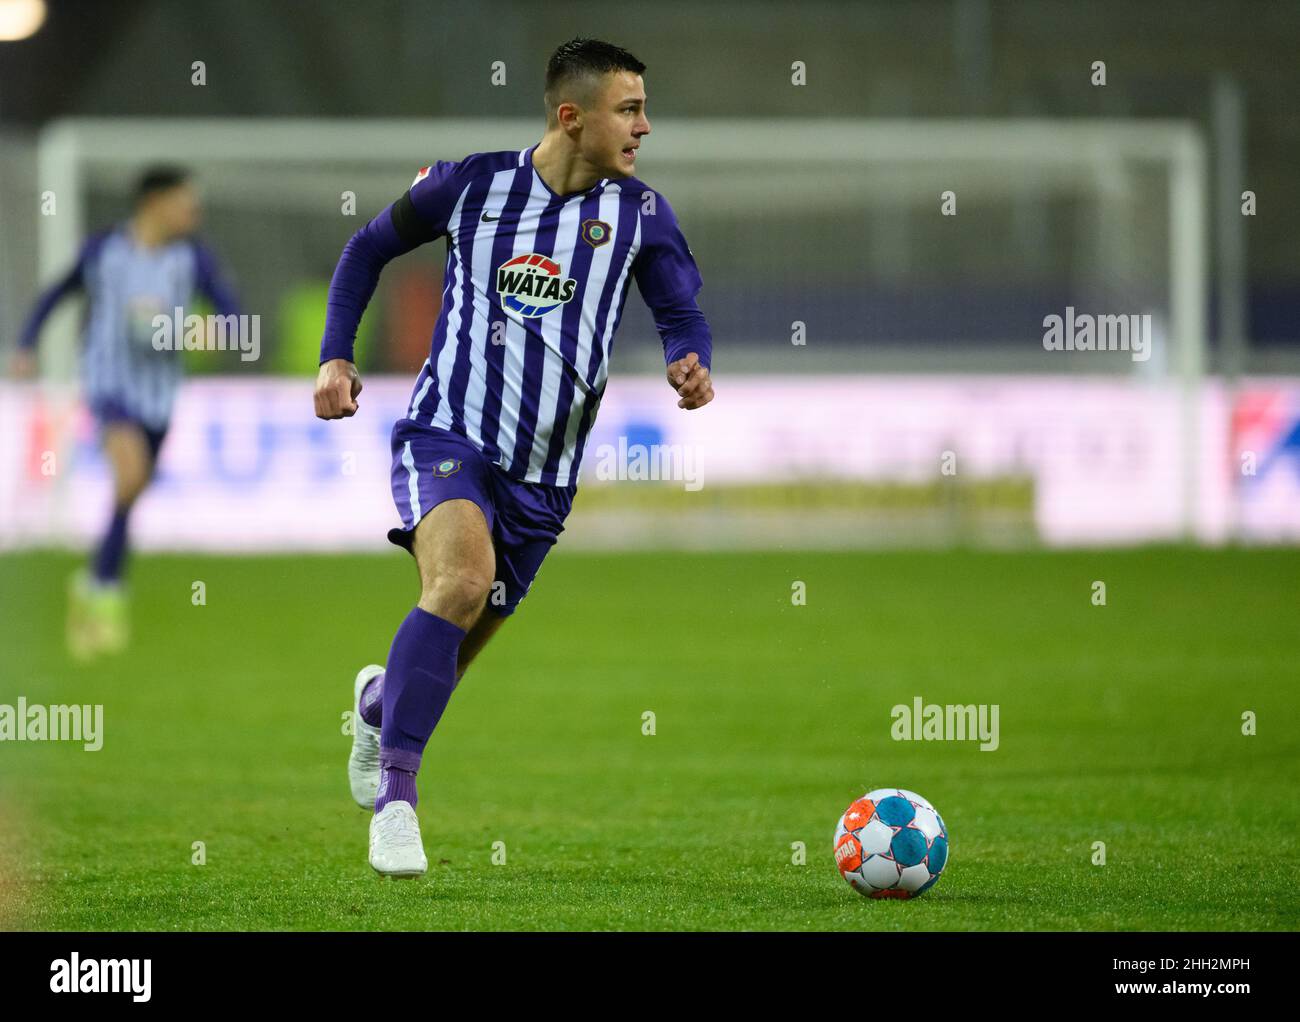 22 January 2022, Saxony, Aue: Soccer: 2. Bundesliga, FC Erzgebirge Aue - FC Schalke 04, Matchday 20, Erzgebirgsstadion. Aue's Antonio Jonjic plays the ball. Photo: Robert Michael/dpa-Zentralbild/dpa - IMPORTANT NOTE: In accordance with the requirements of the DFL Deutsche Fußball Liga and the DFB Deutscher Fußball-Bund, it is prohibited to use or have used photographs taken in the stadium and/or of the match in the form of sequence pictures and/or video-like photo series. Stock Photo